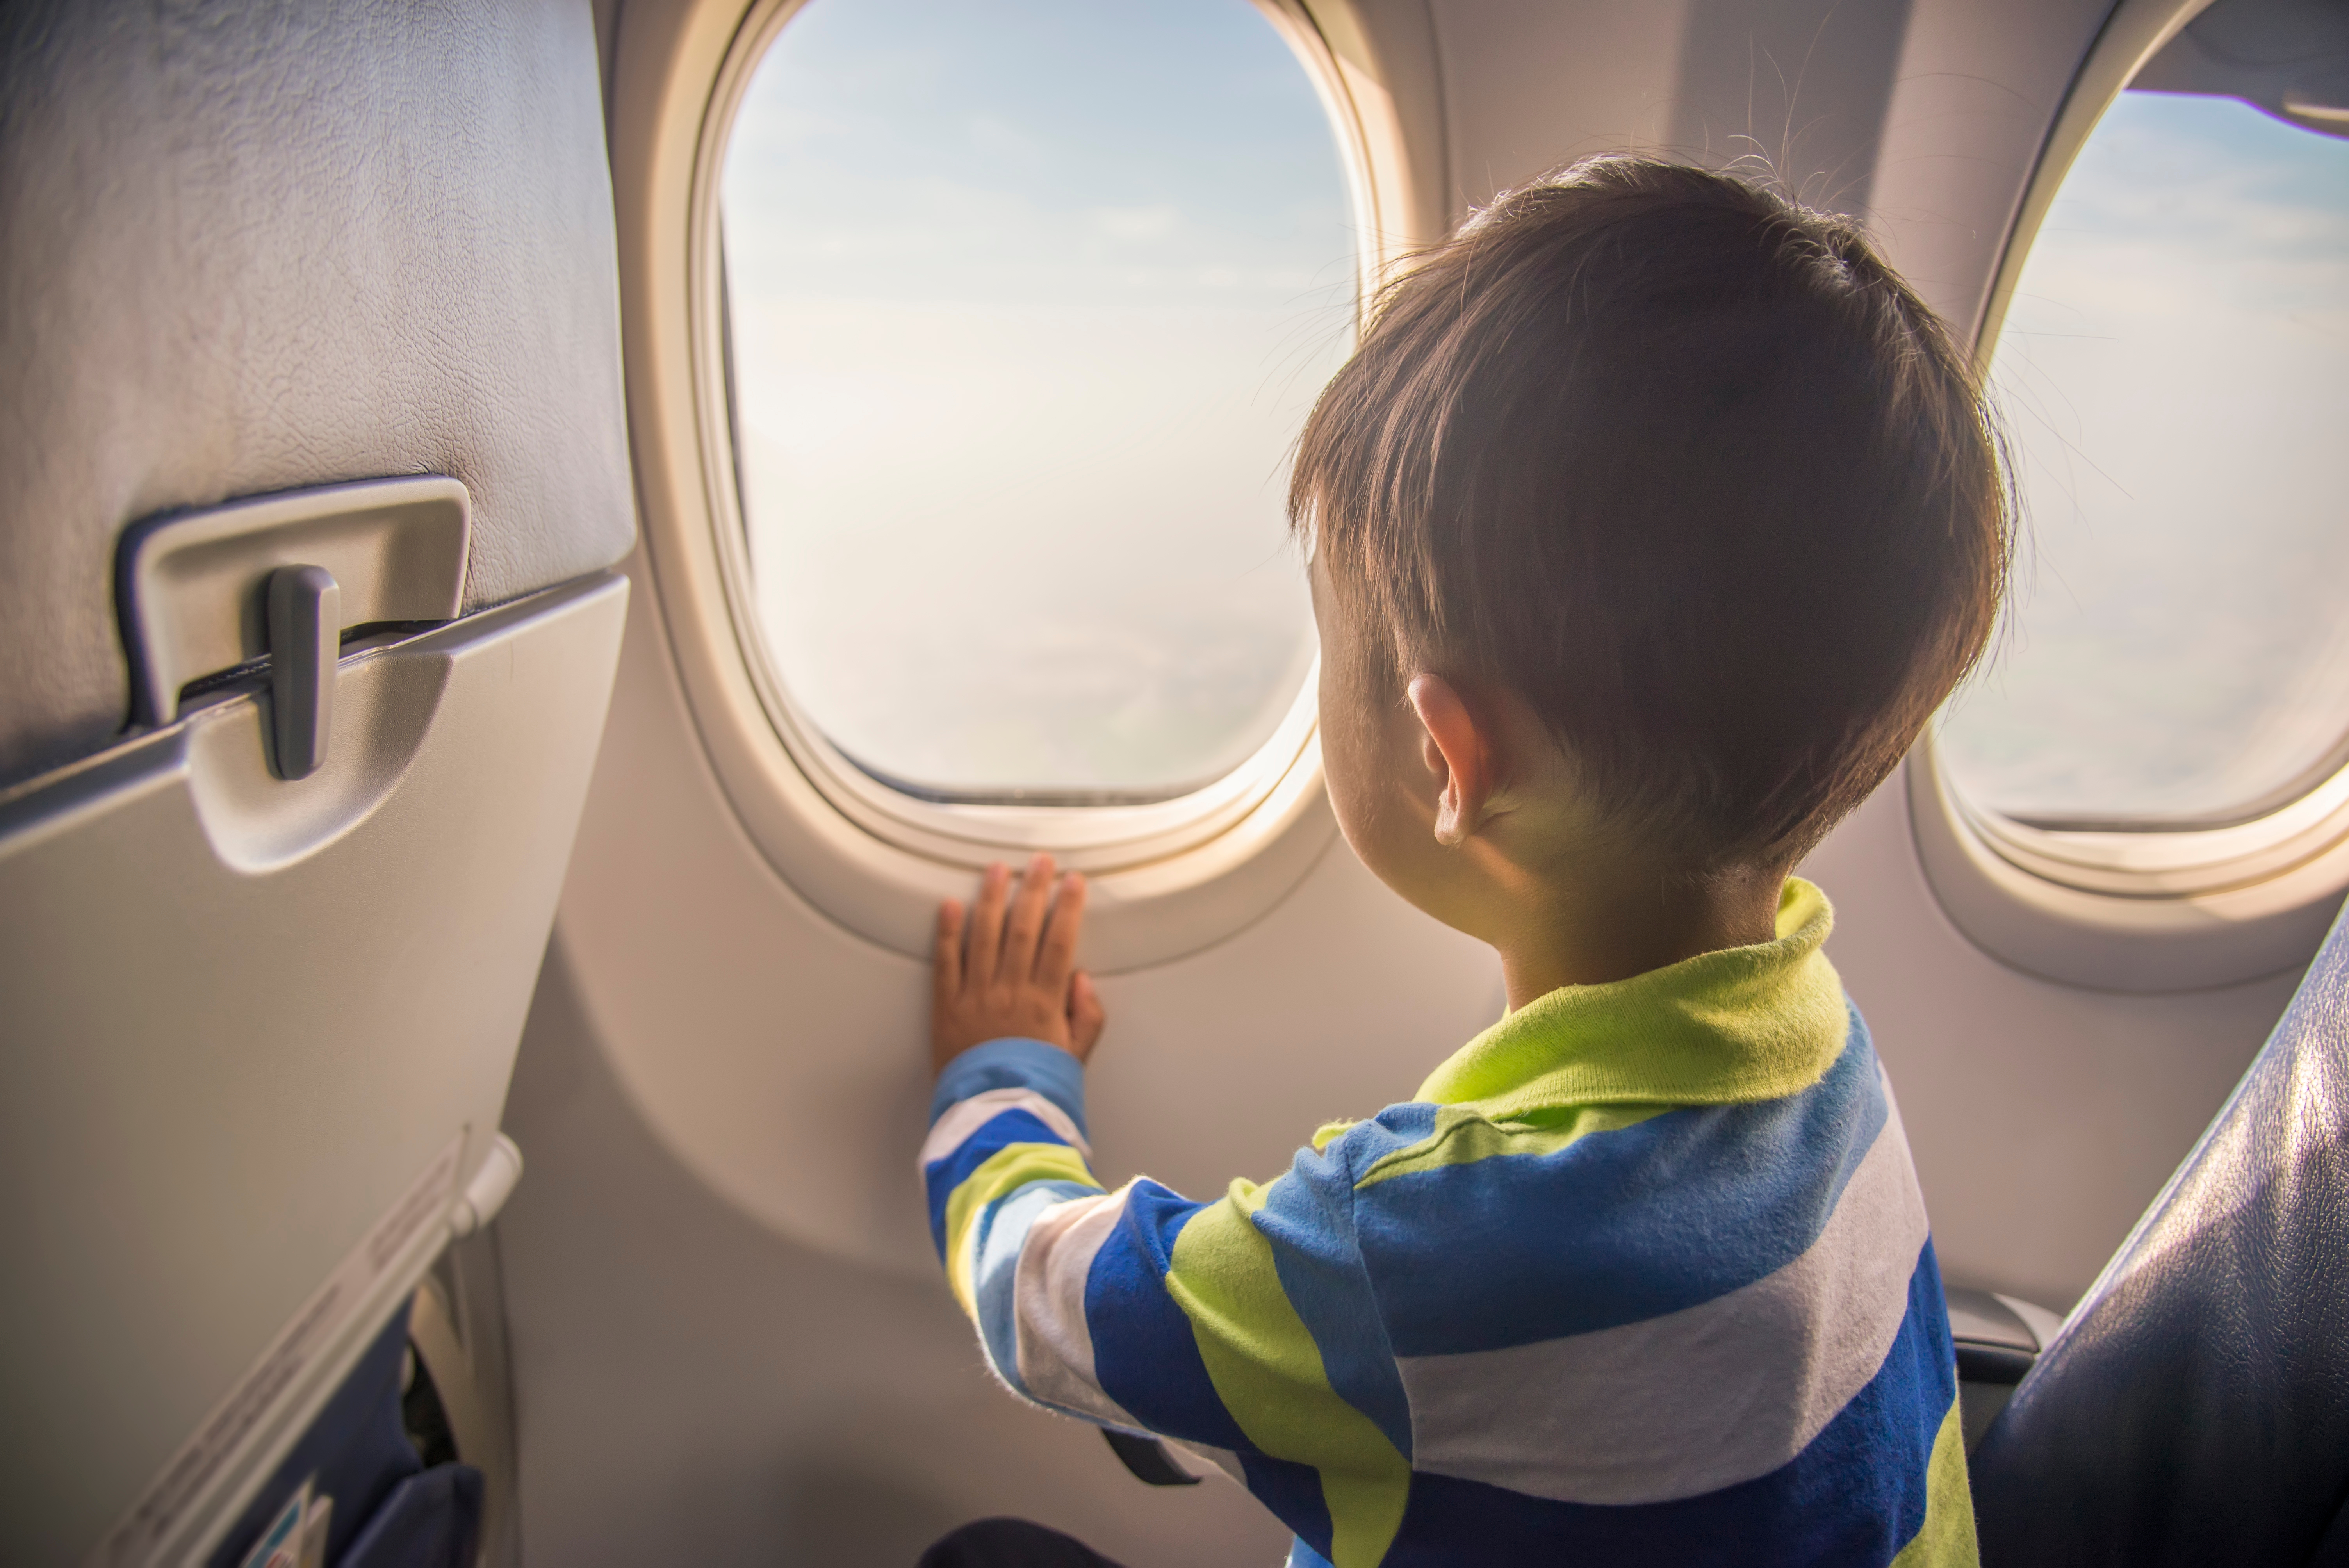 A child on a plane | Source: Shutterstock